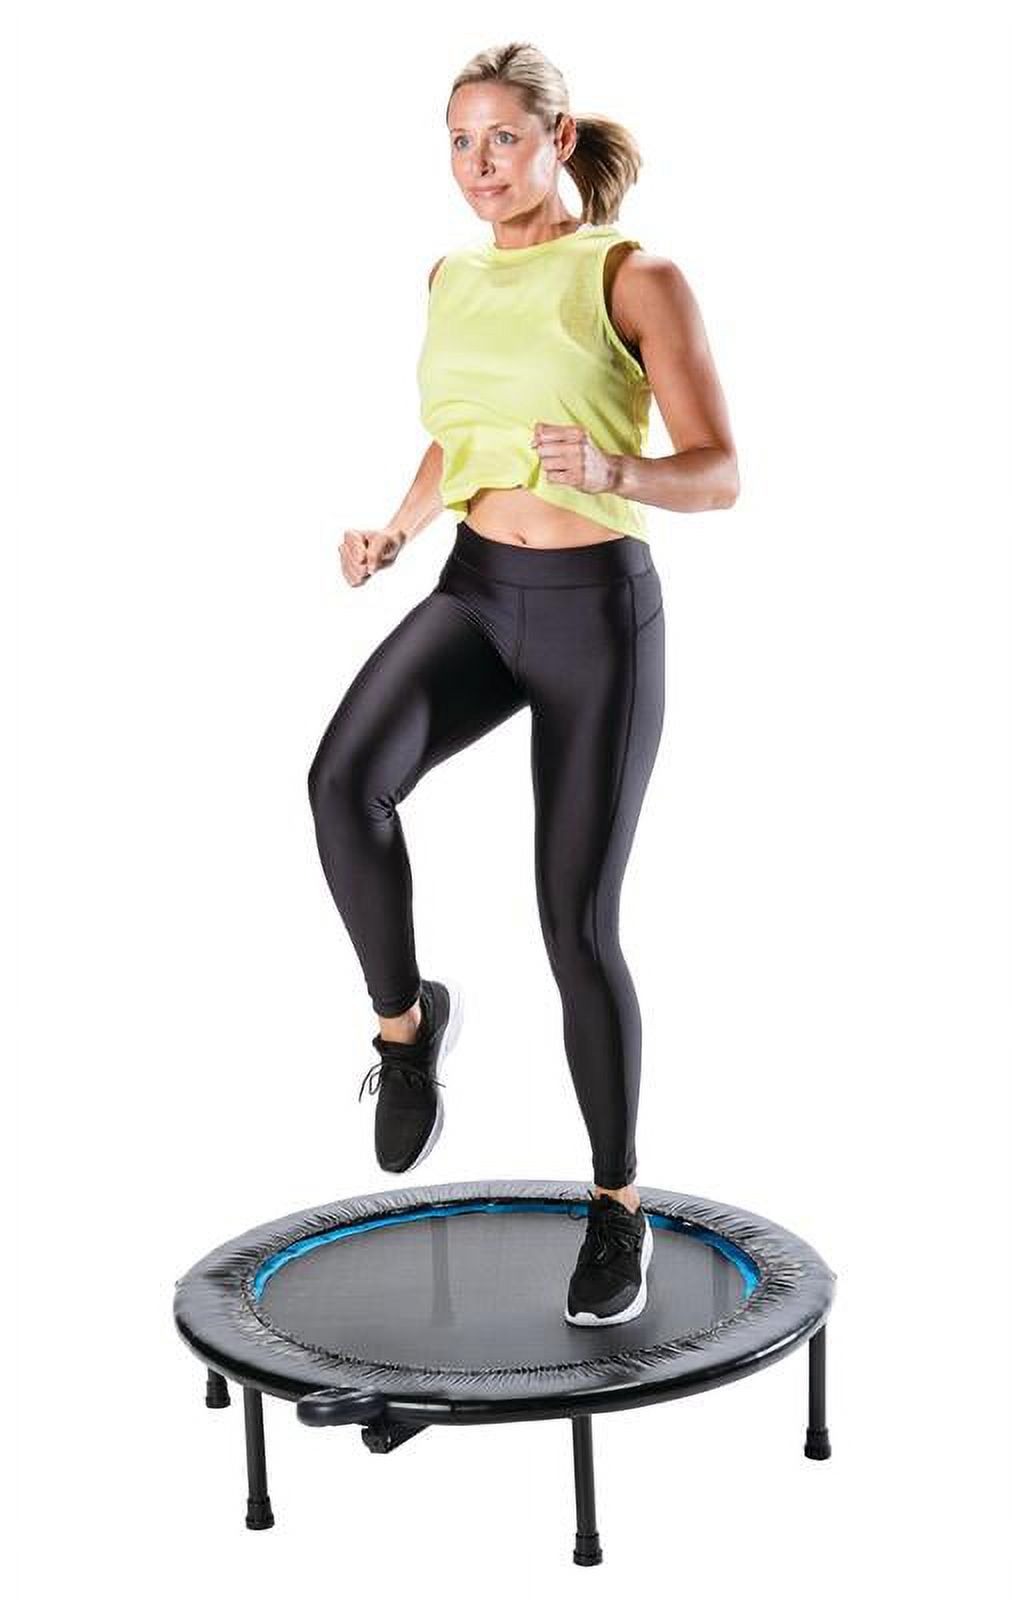 Stamina Circuit Trainer Trampoline with Monitor and Adjustable Incline, 36" W x 36" D x 12" H, Black - image 3 of 9